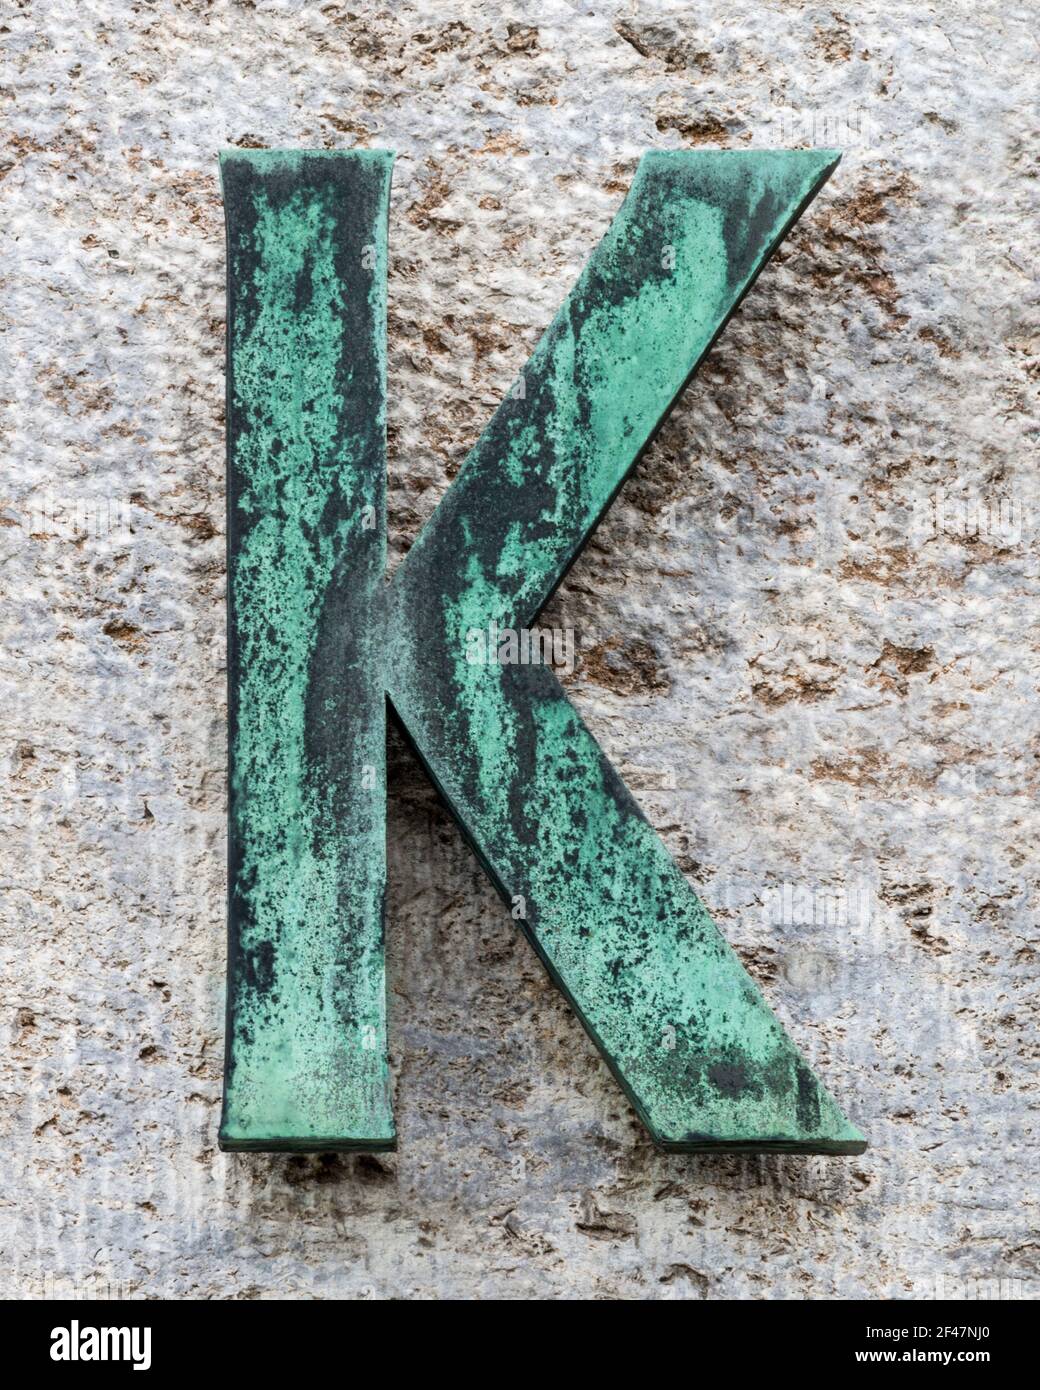 Metal letter K covered with verdigris on a natural stone wall Stock Photo